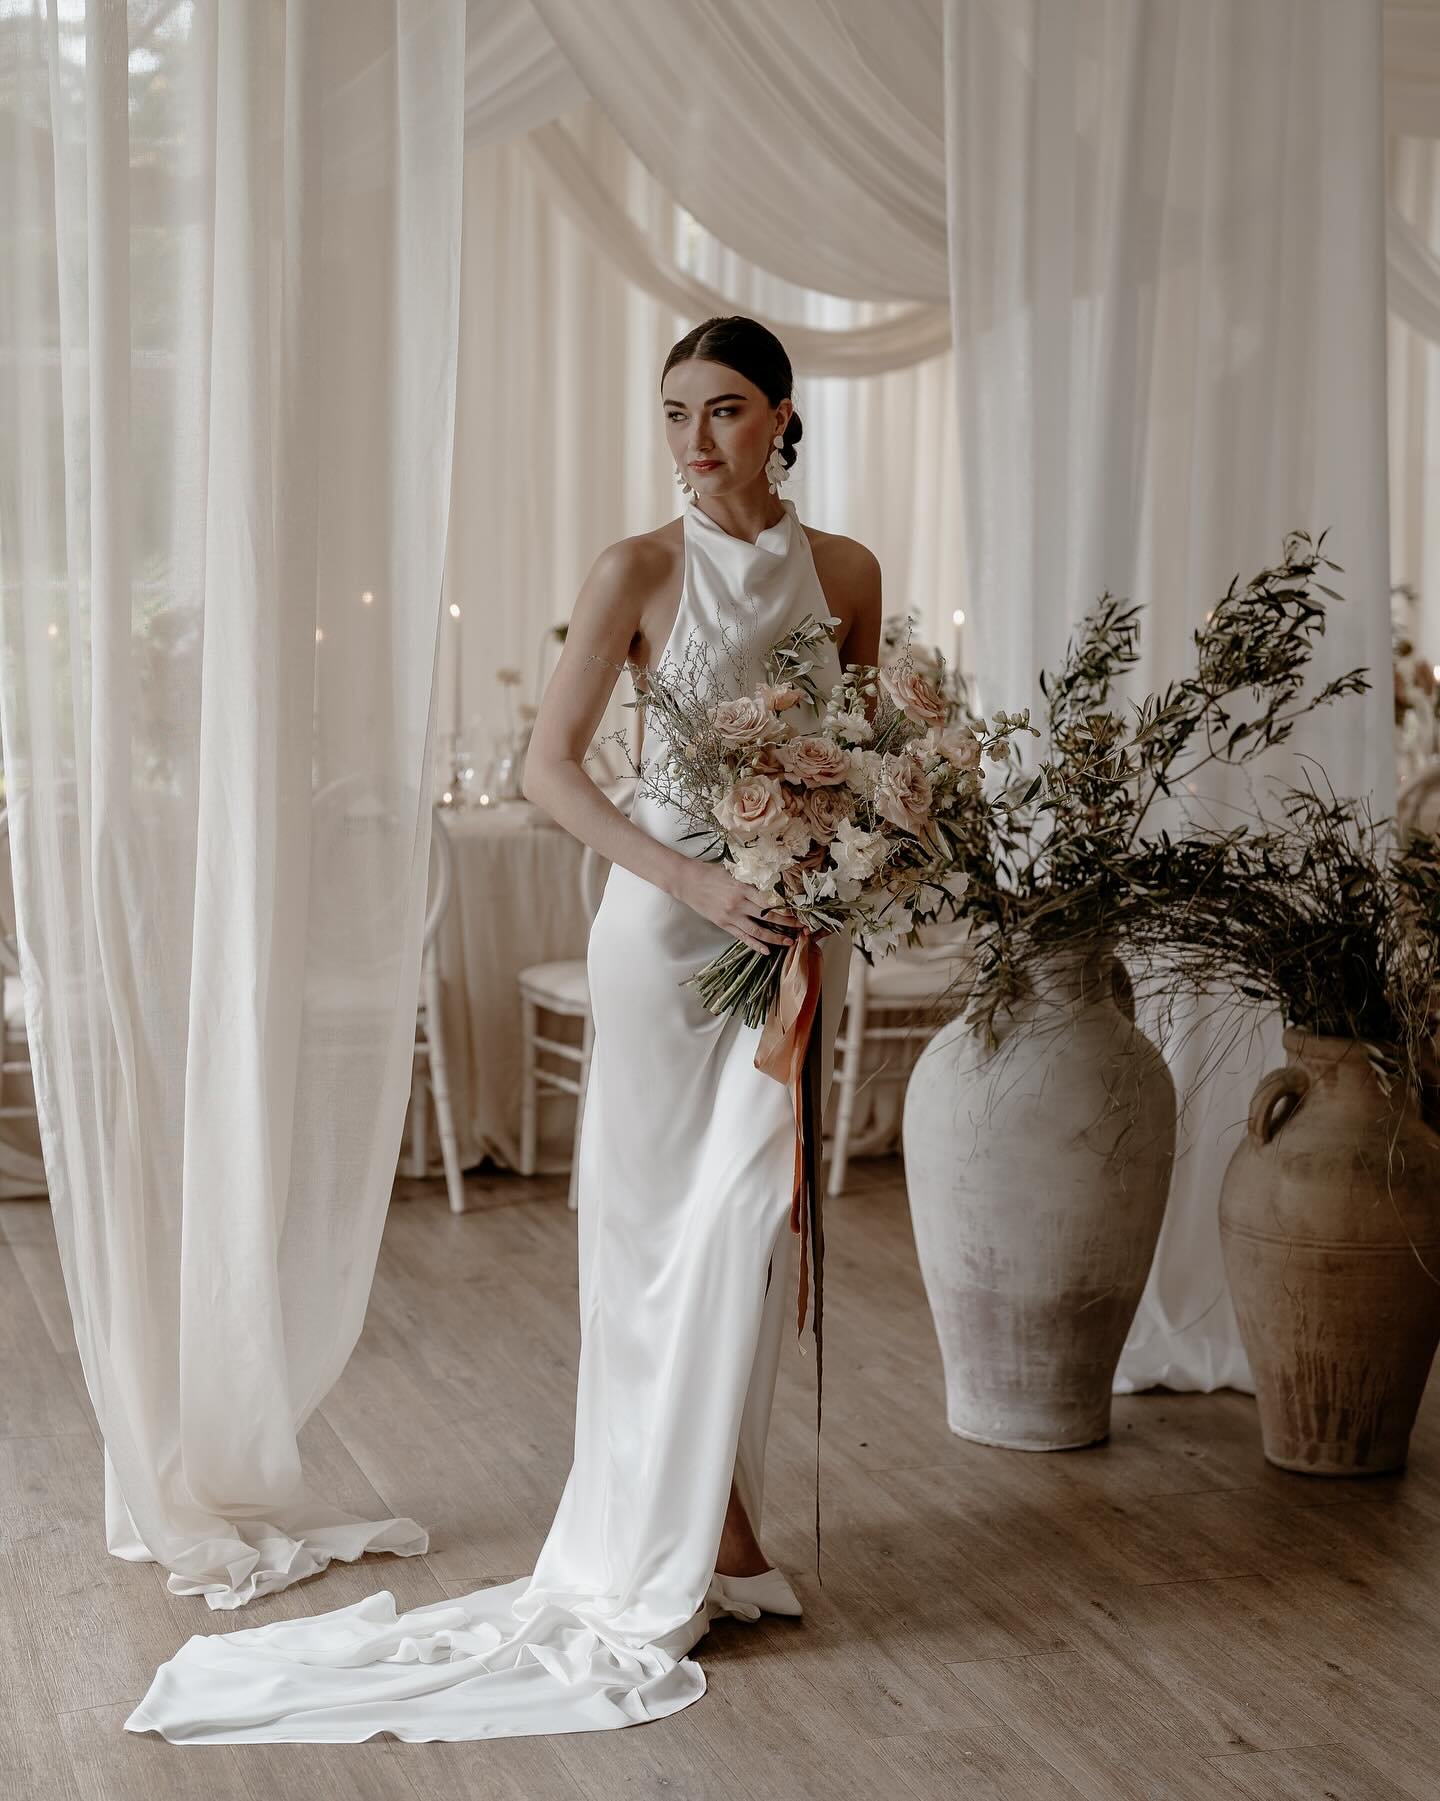 The most beautiful bridal gown by @grace_loves_lace worn by @elenalee16 at this modern, Italian wedding shoot&hellip; incredible styling, all my favourite colours, soft romantic draping, incredible bouquets and floral installations, stunning bridal h